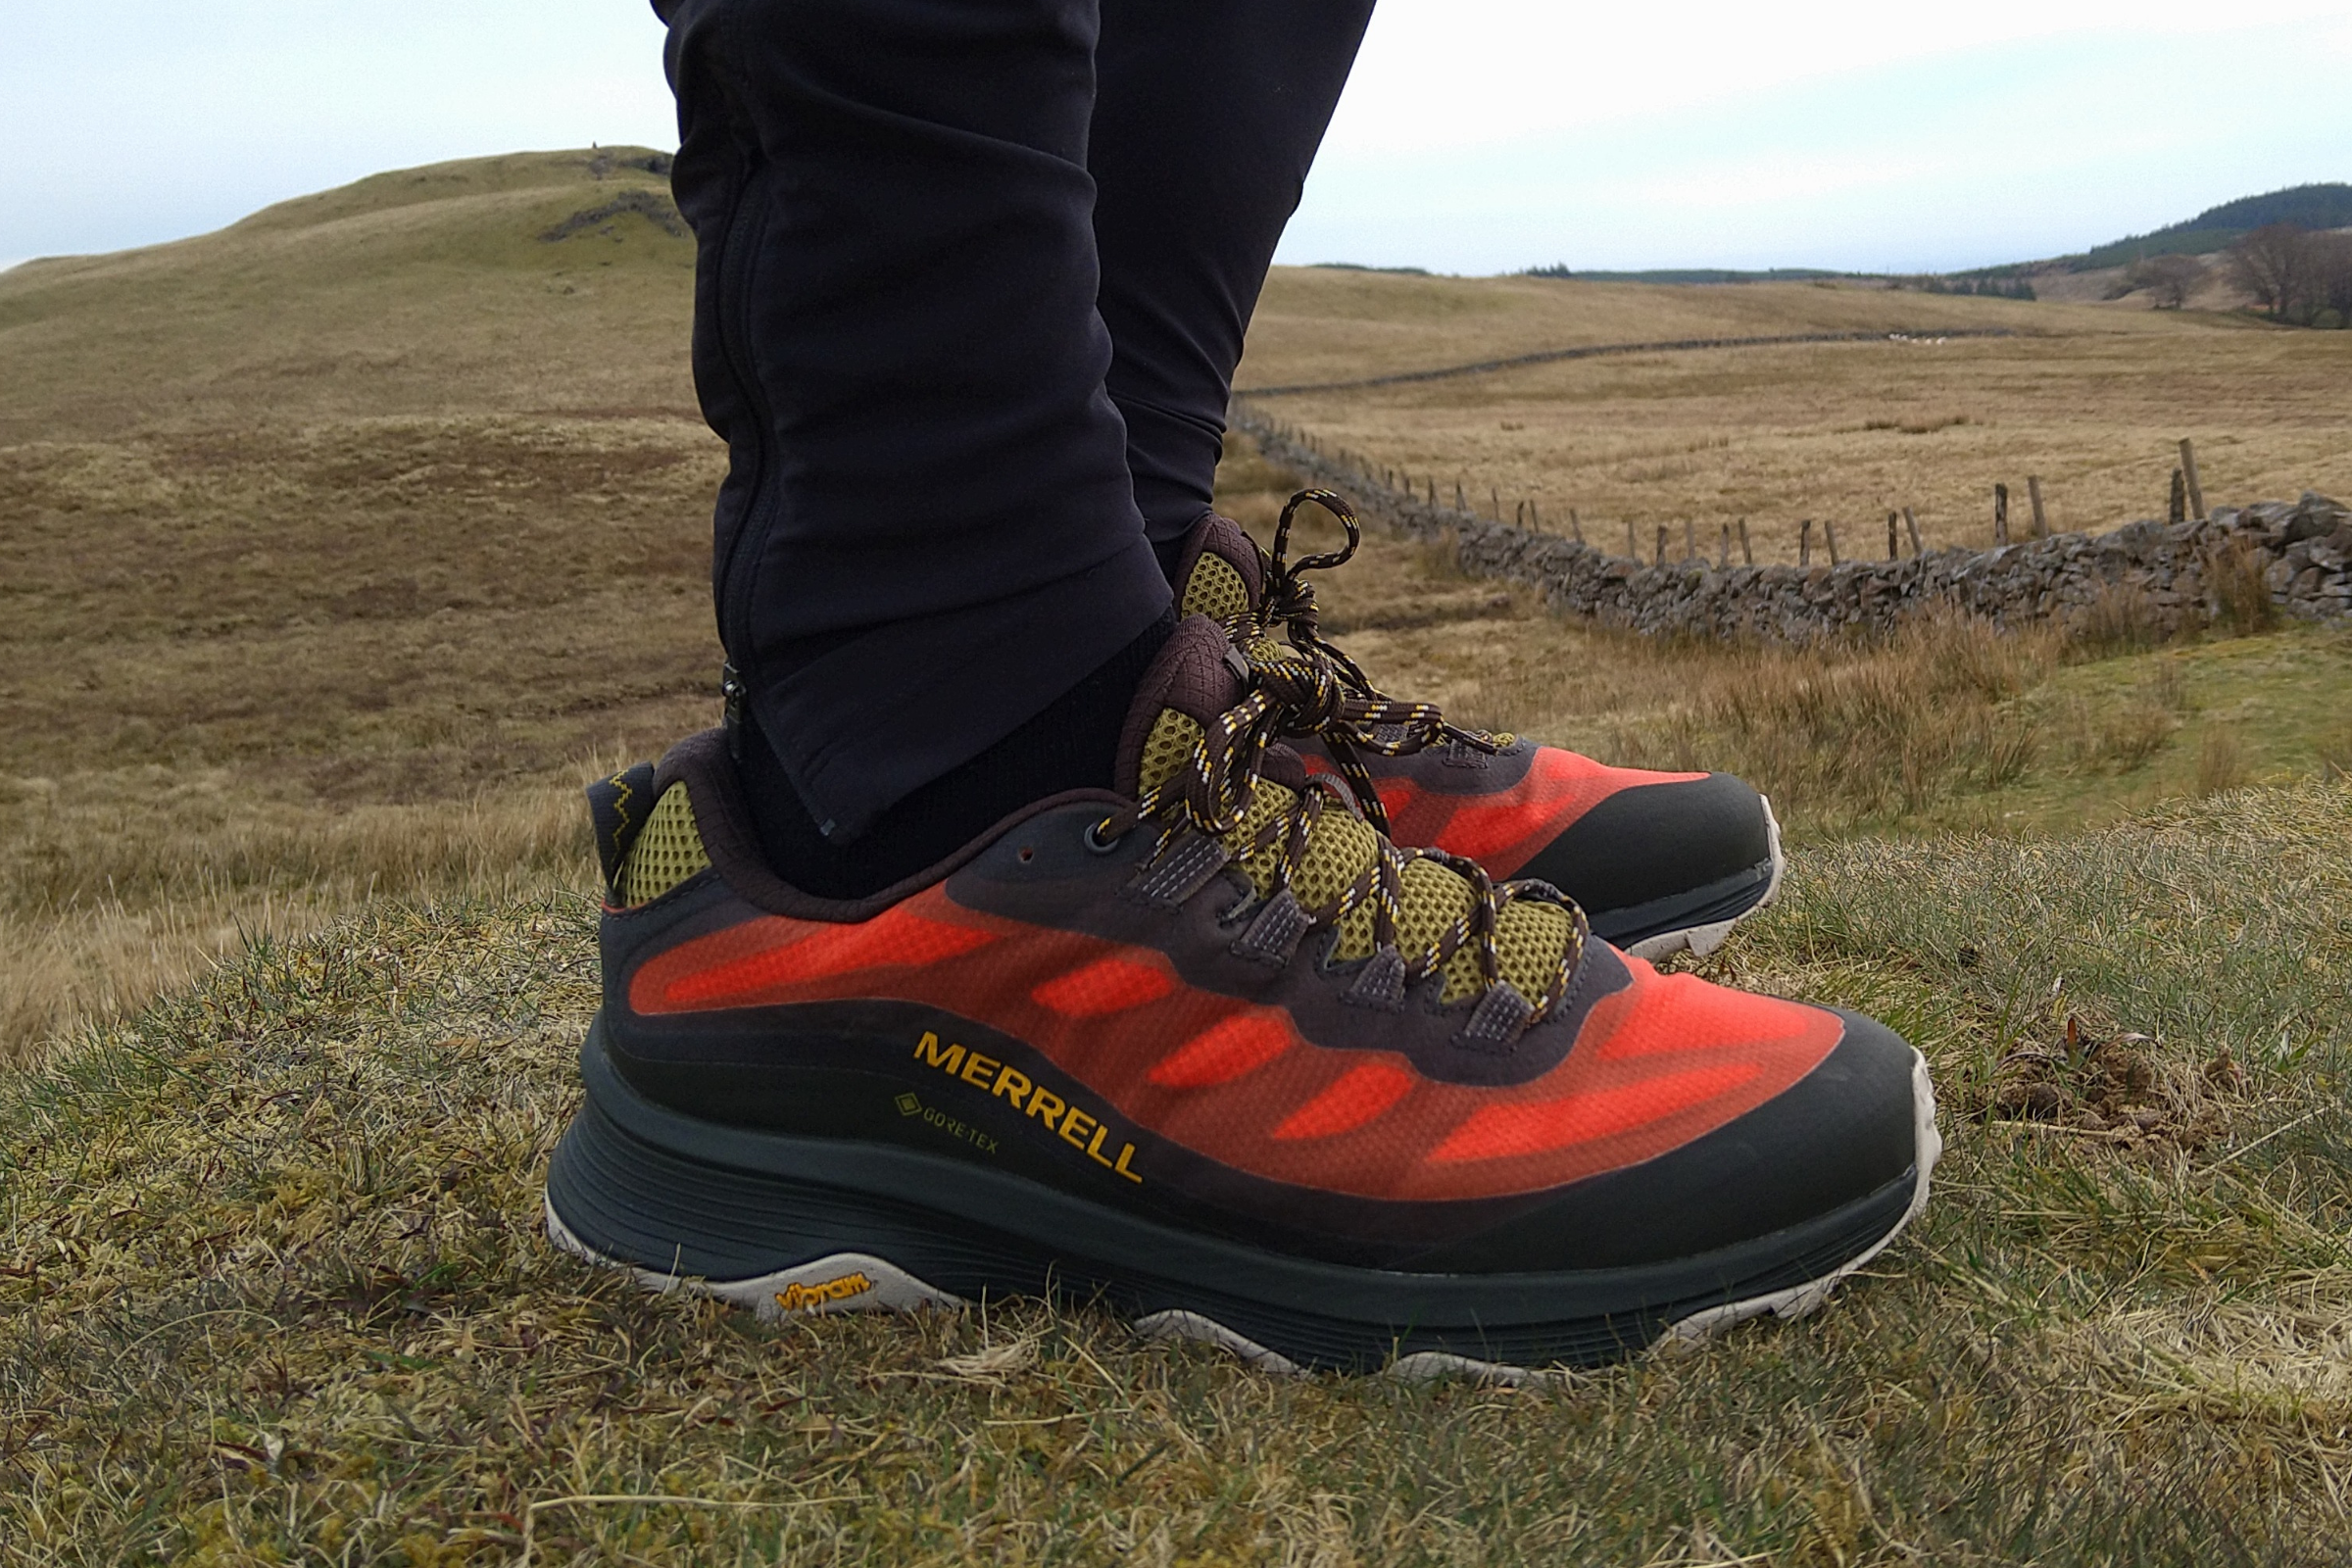 Merrell Moab Speed GTX trail shoes review